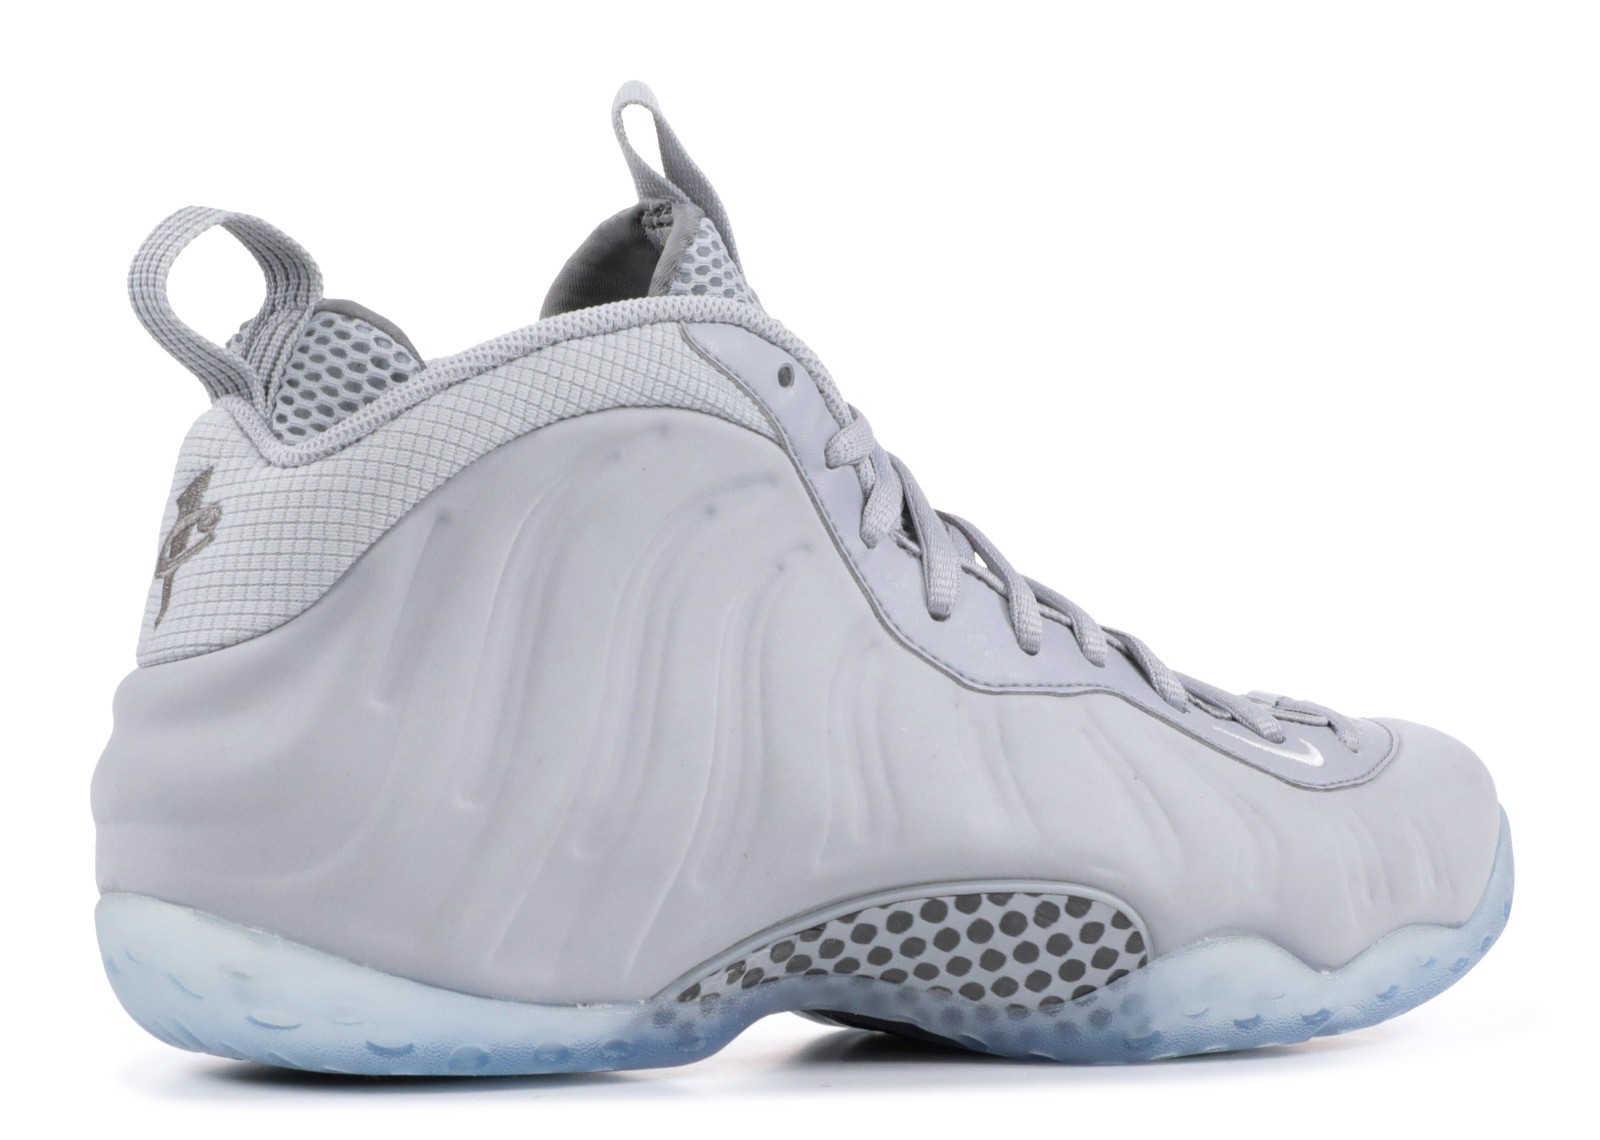 Air Foamposite One Prm White Wolf Grey Black Cool 575420-007 